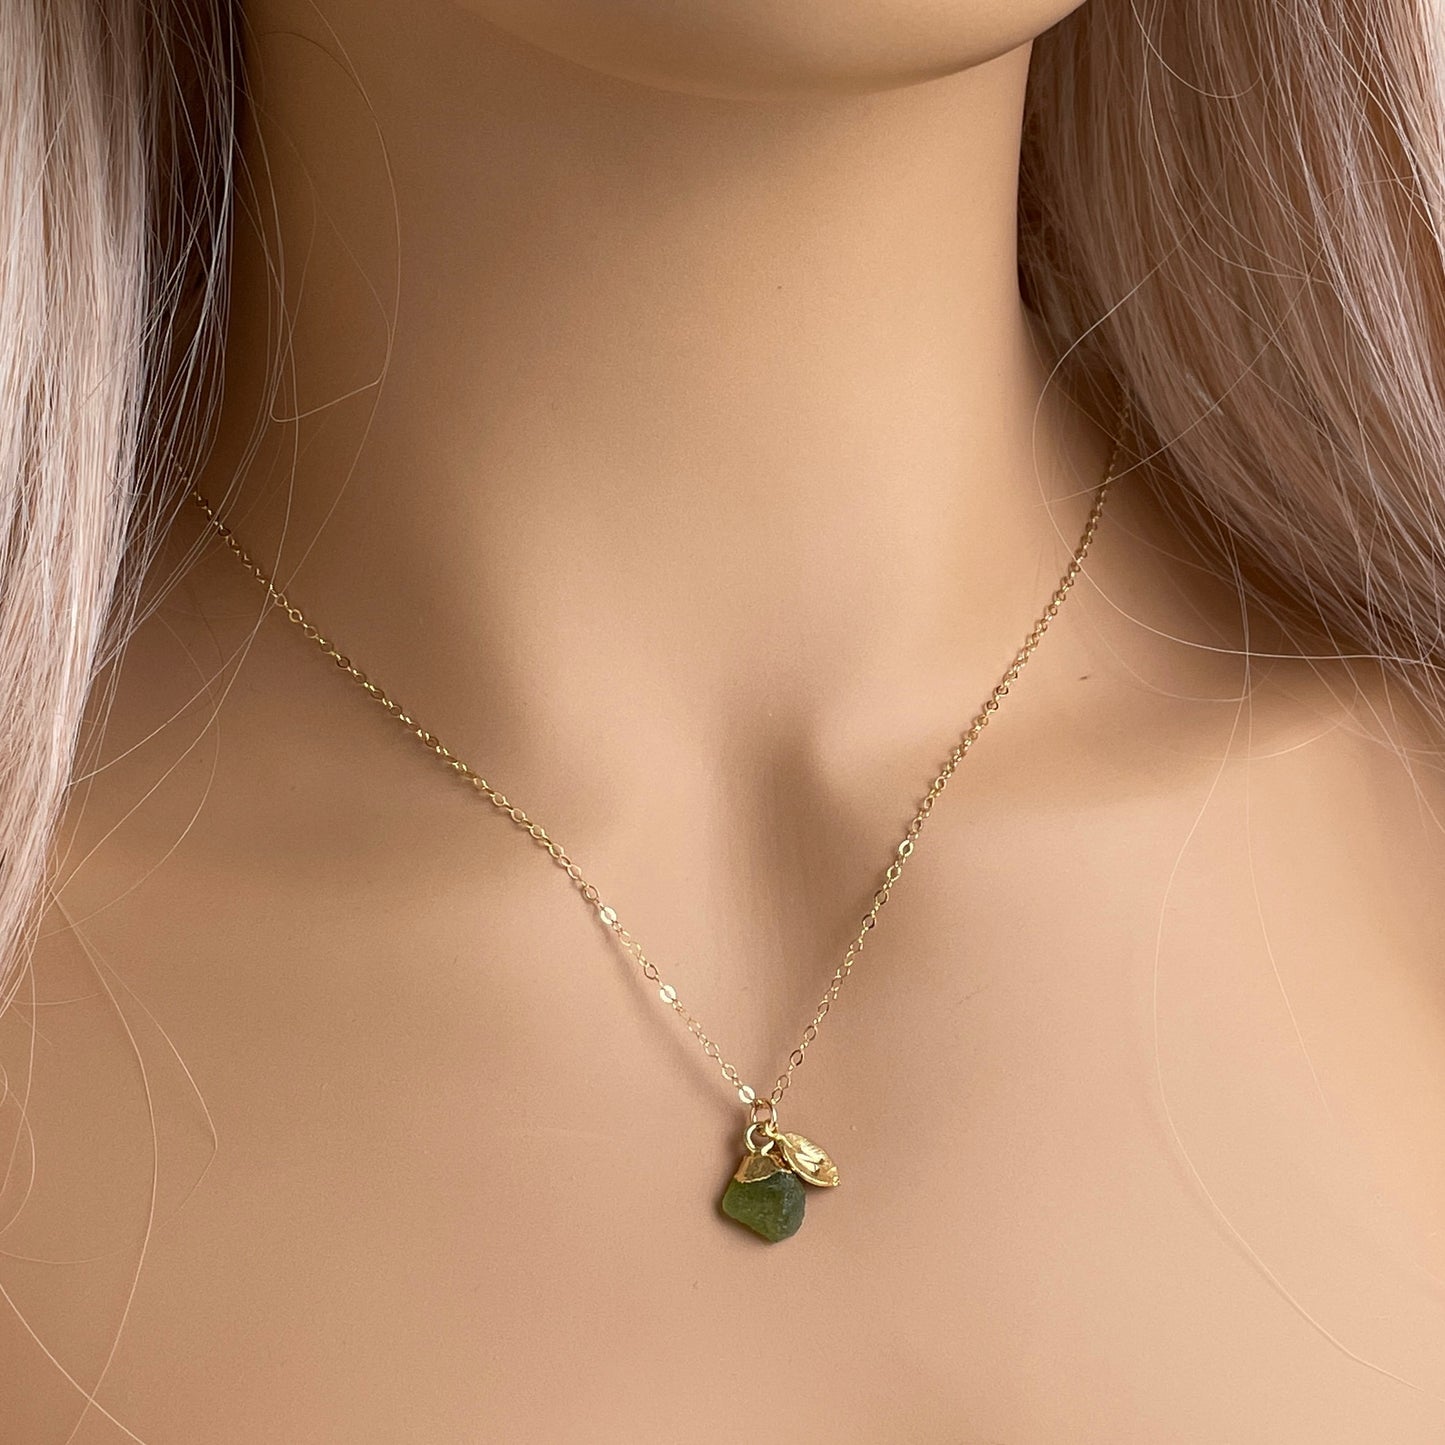 August Birthstone Tiny Raw Peridot Necklace Gold with Personalized Initial Charm, M6-722